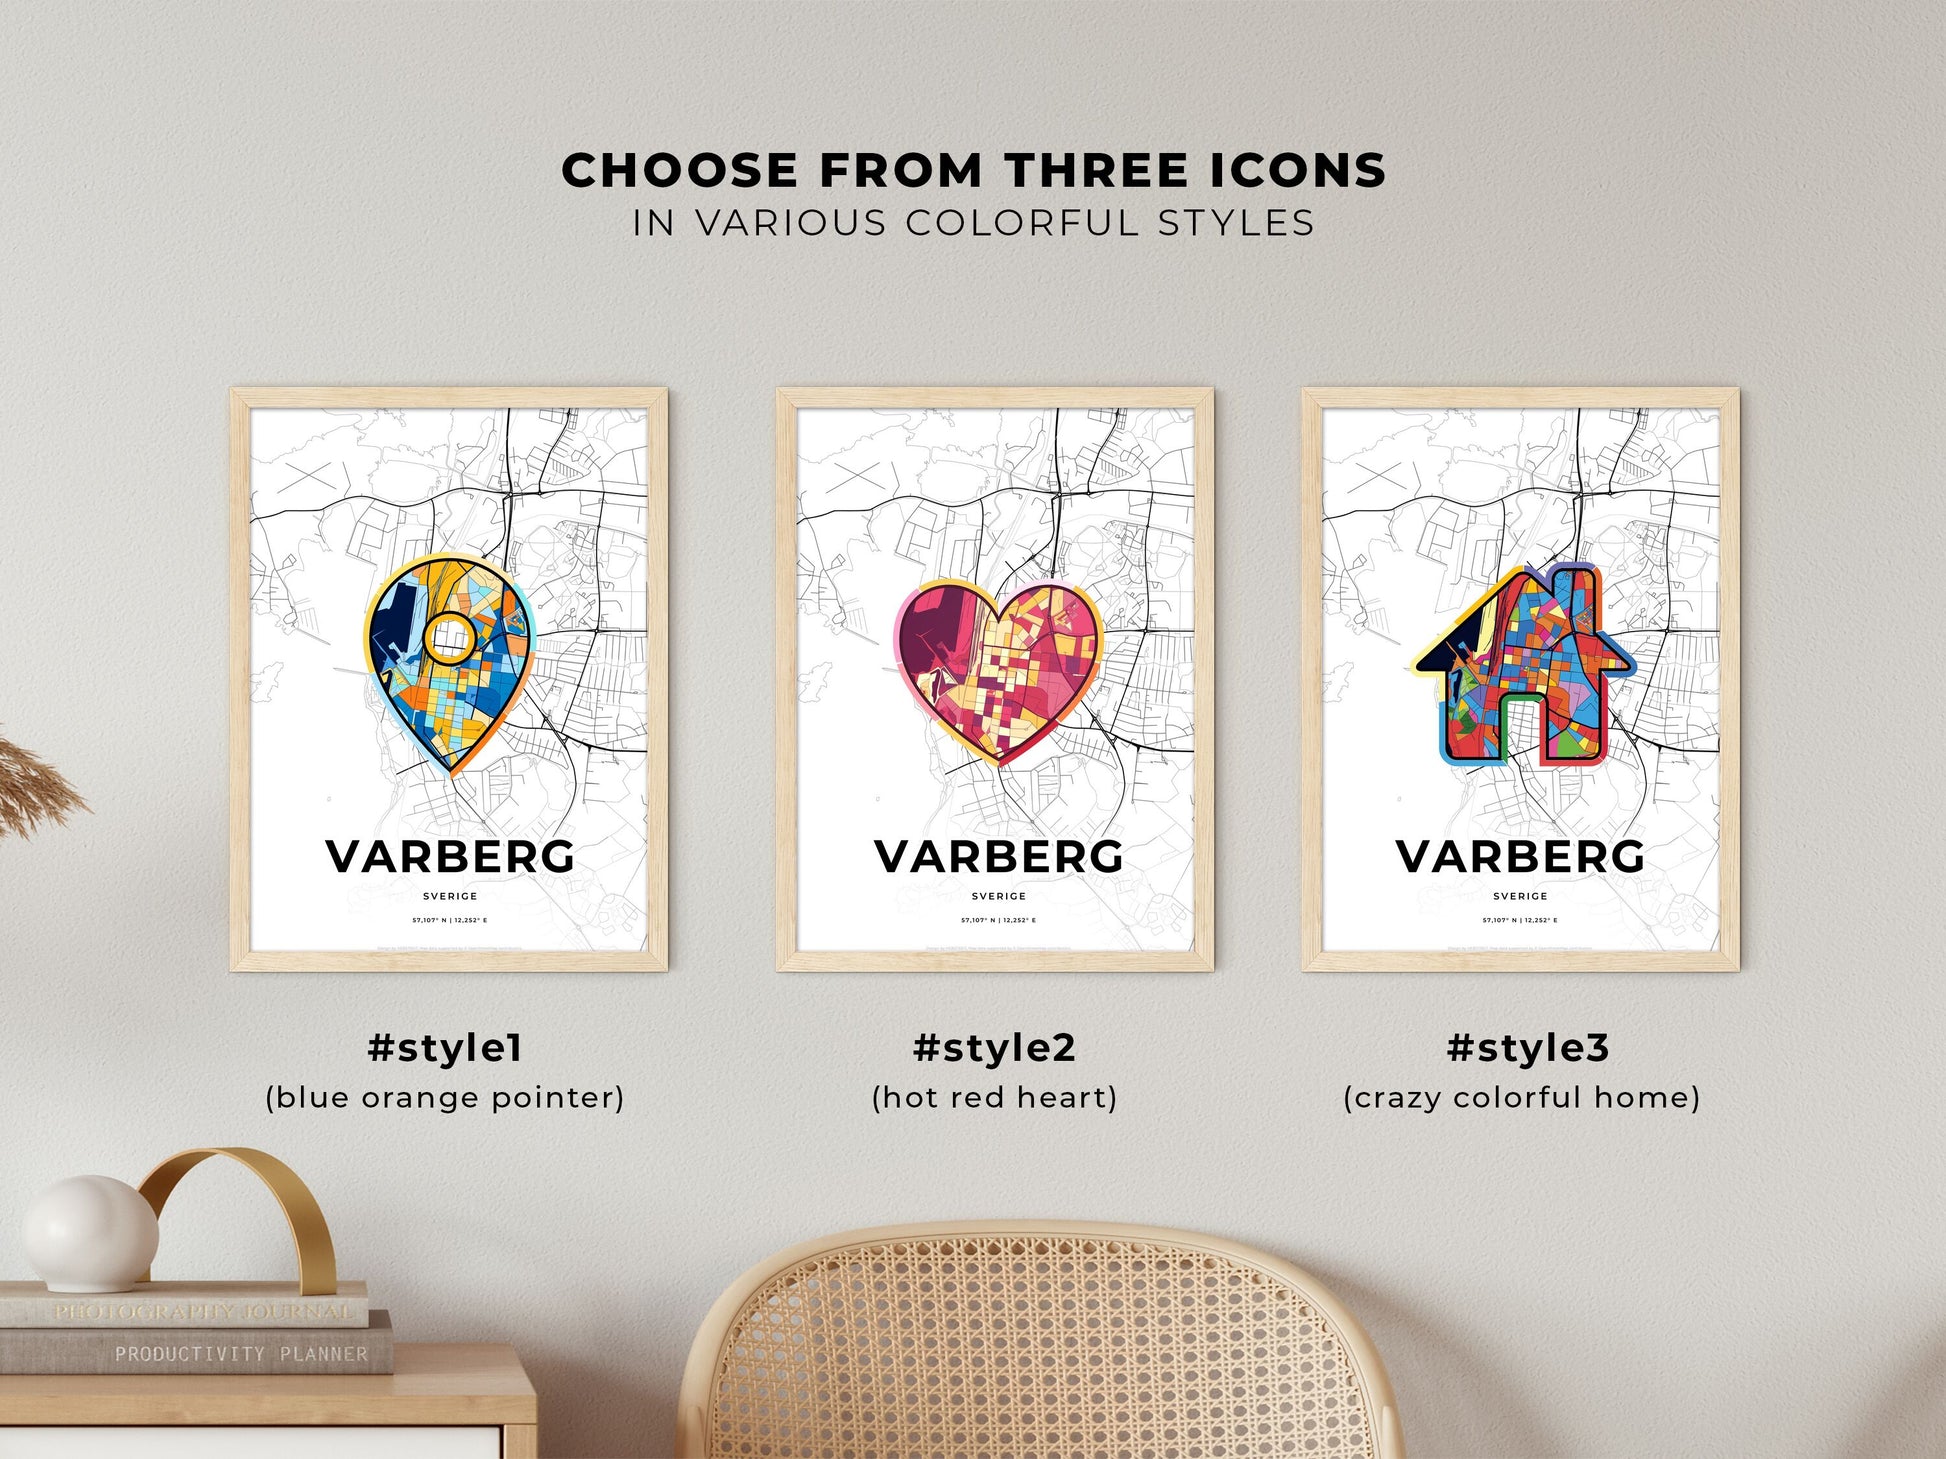 VARBERG SWEDEN minimal art map with a colorful icon. Where it all began, Couple map gift.